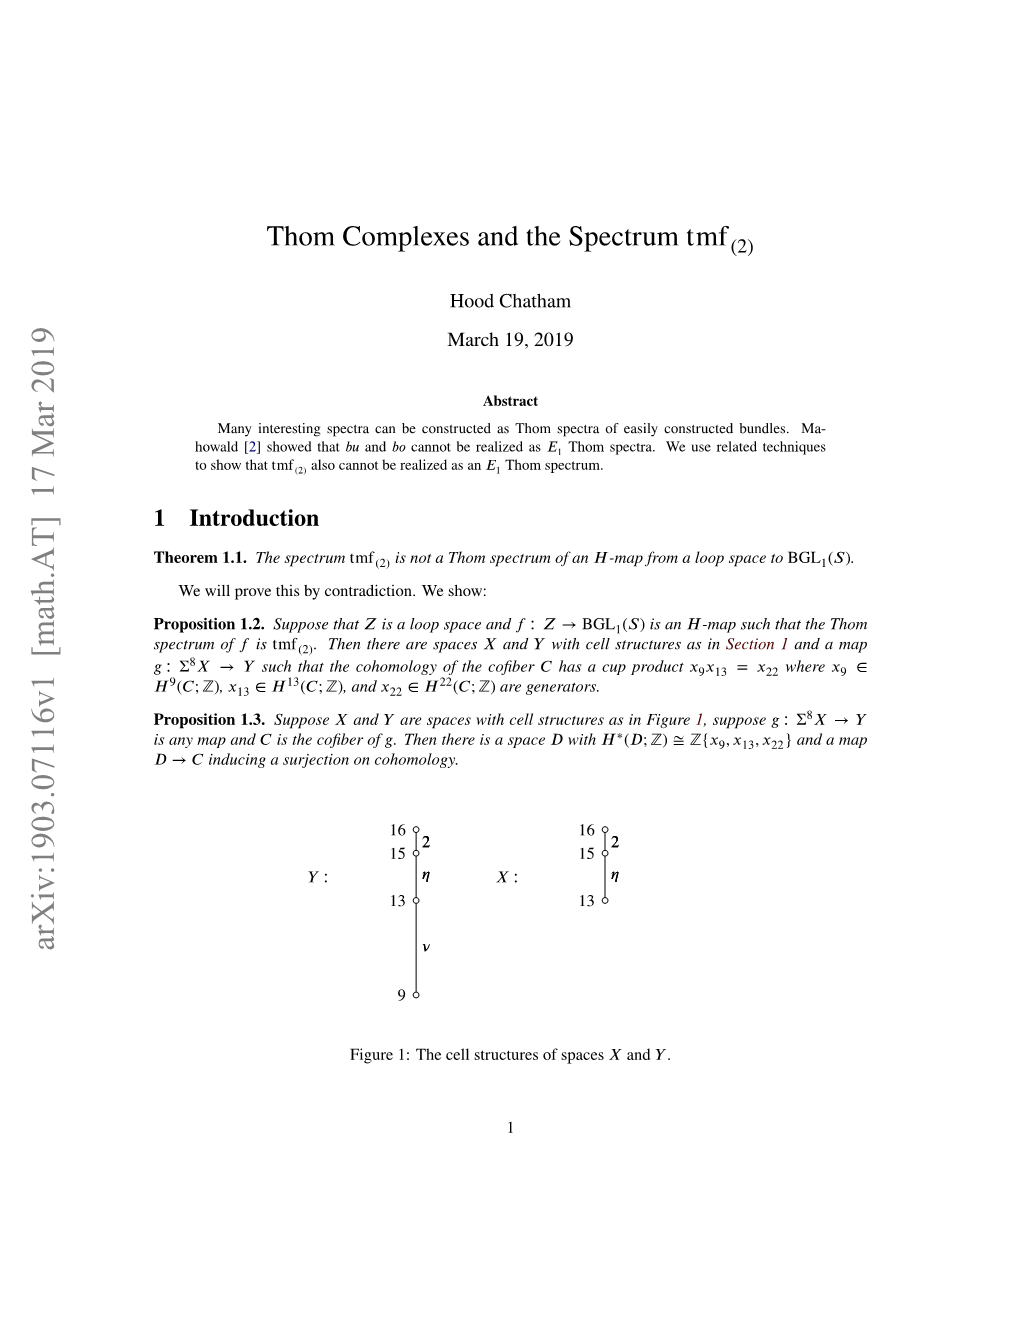 Thom Complexes and the Spectrum Tmf (2)